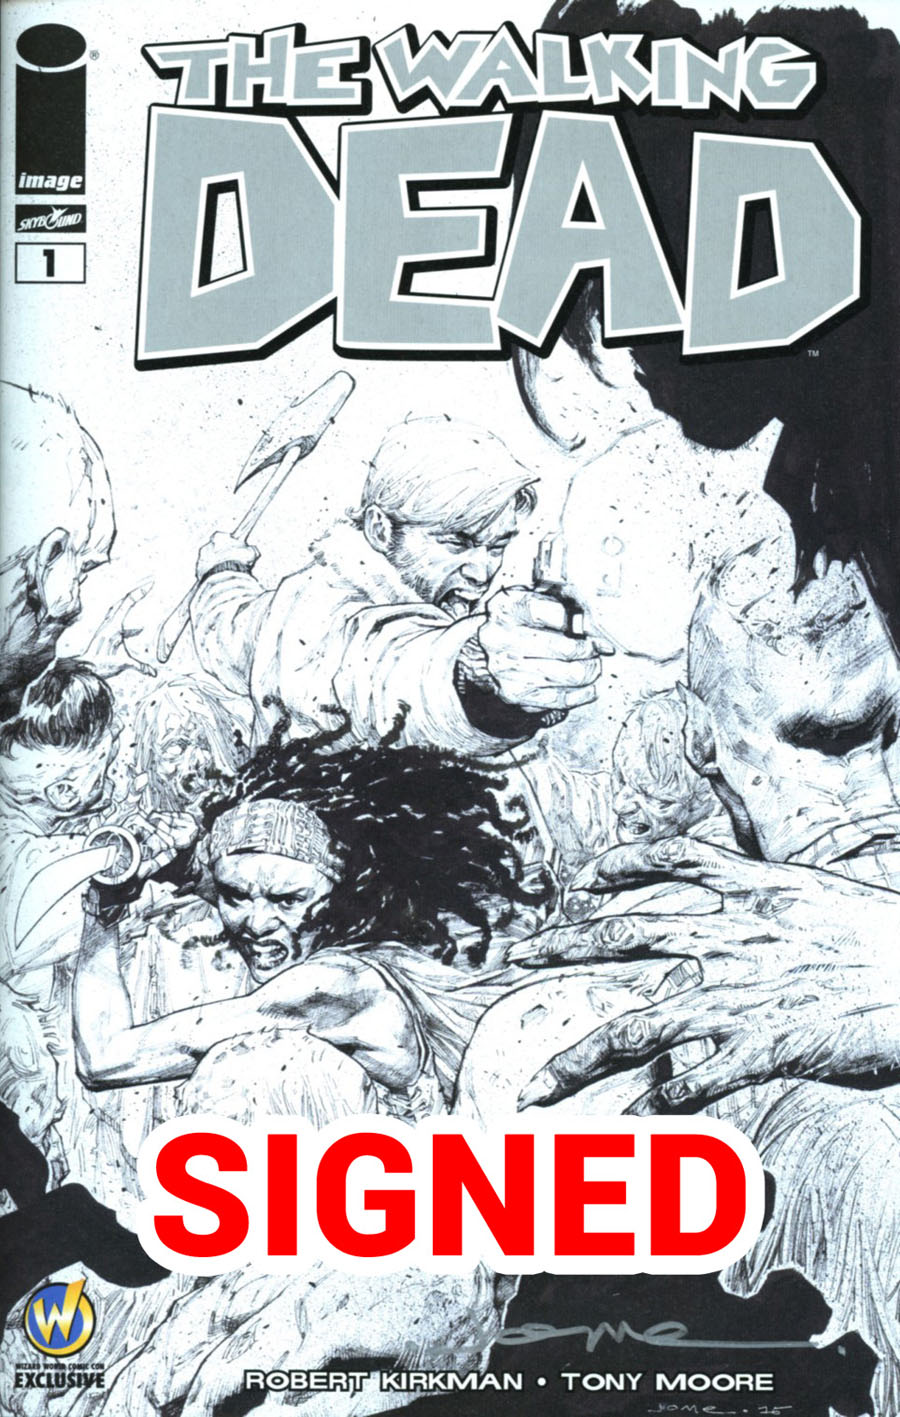 Walking Dead #1 Cover Z-S Wizard World Comic Con Nashville VIP Exclusive Jerome Opena Sketch Variant Cover Signed By Jerome Opena